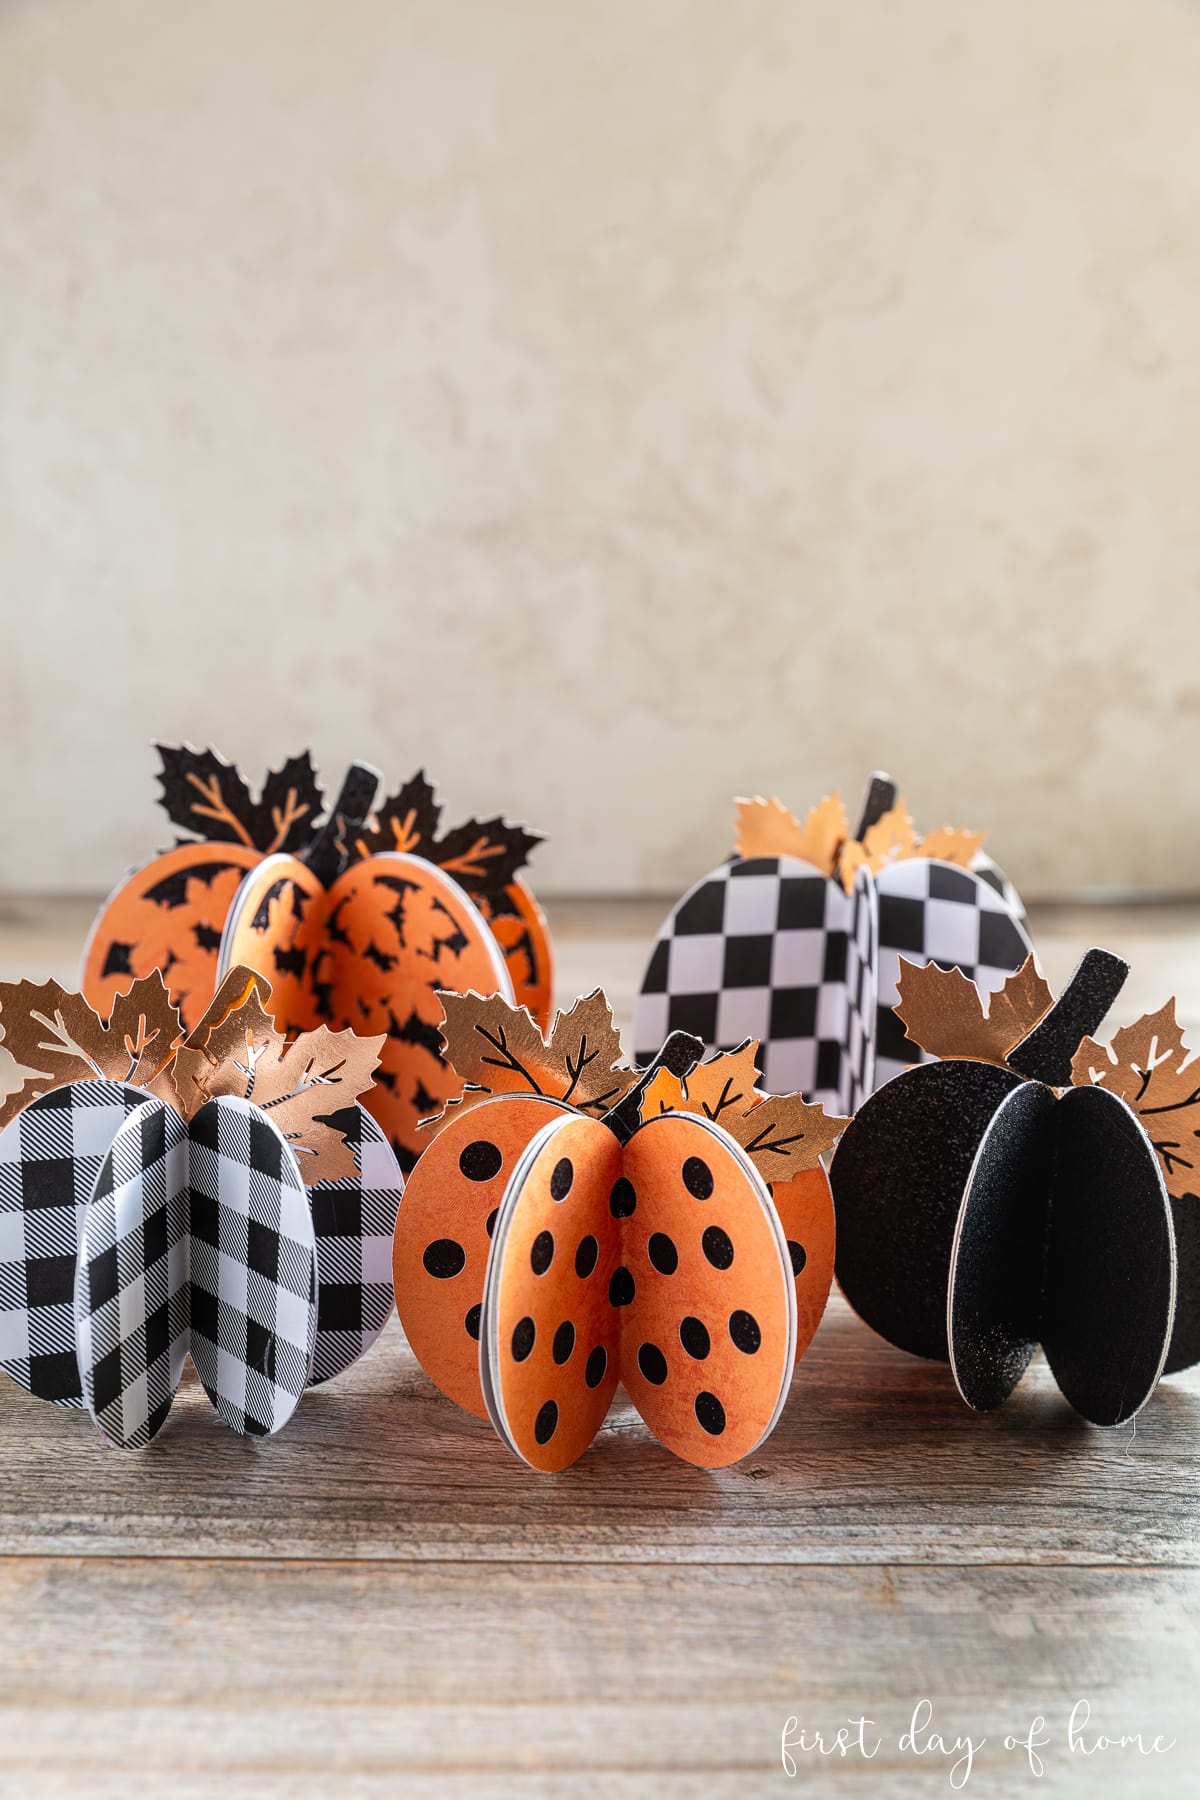 Five 3D paper pumpkins with Halloween themed patterns and colors